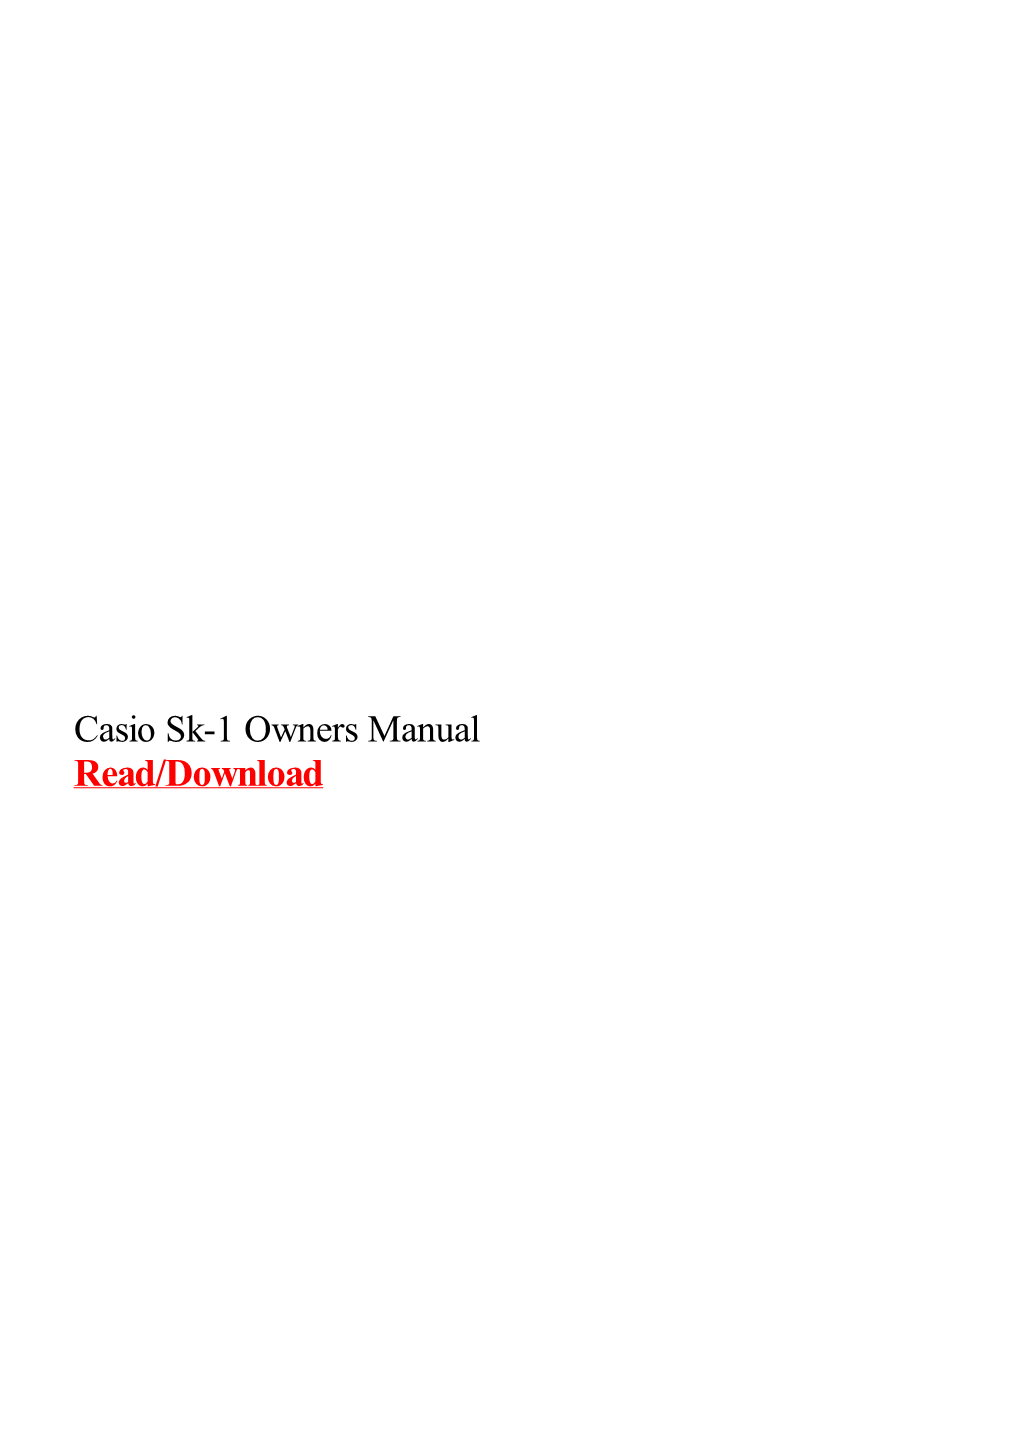 Casio Sk-1 Owners Manual